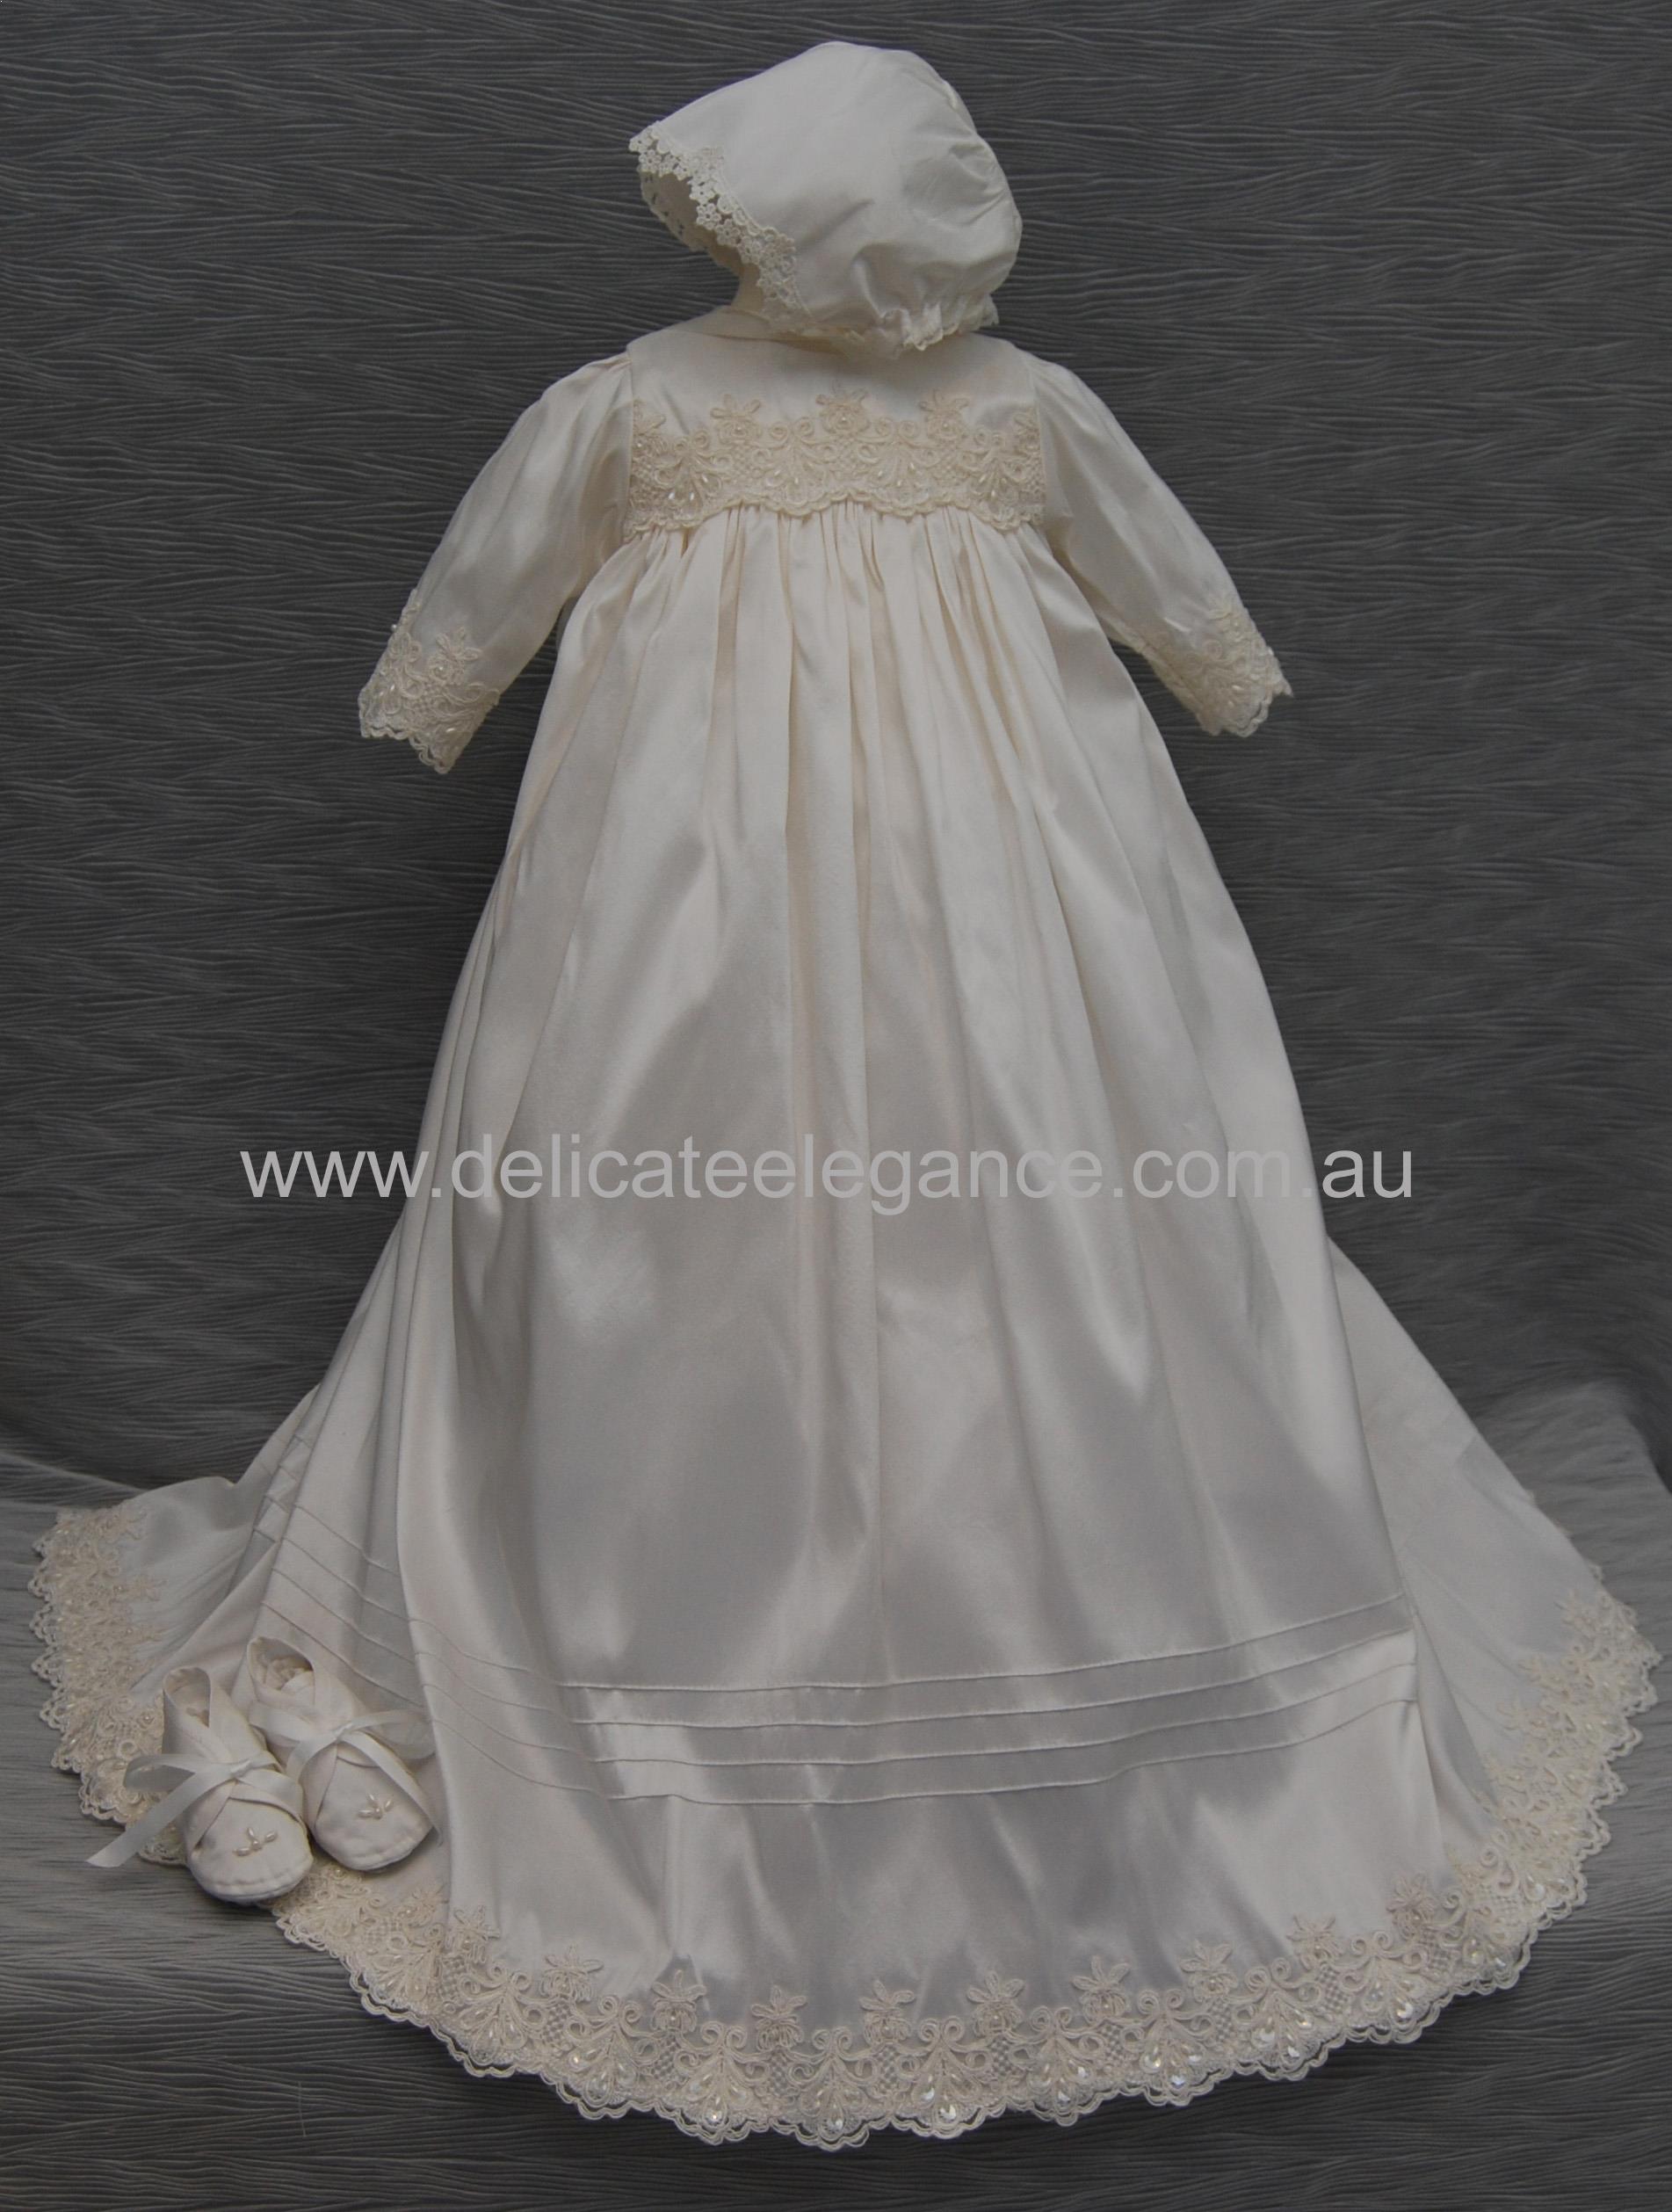 christening gowns sydney road